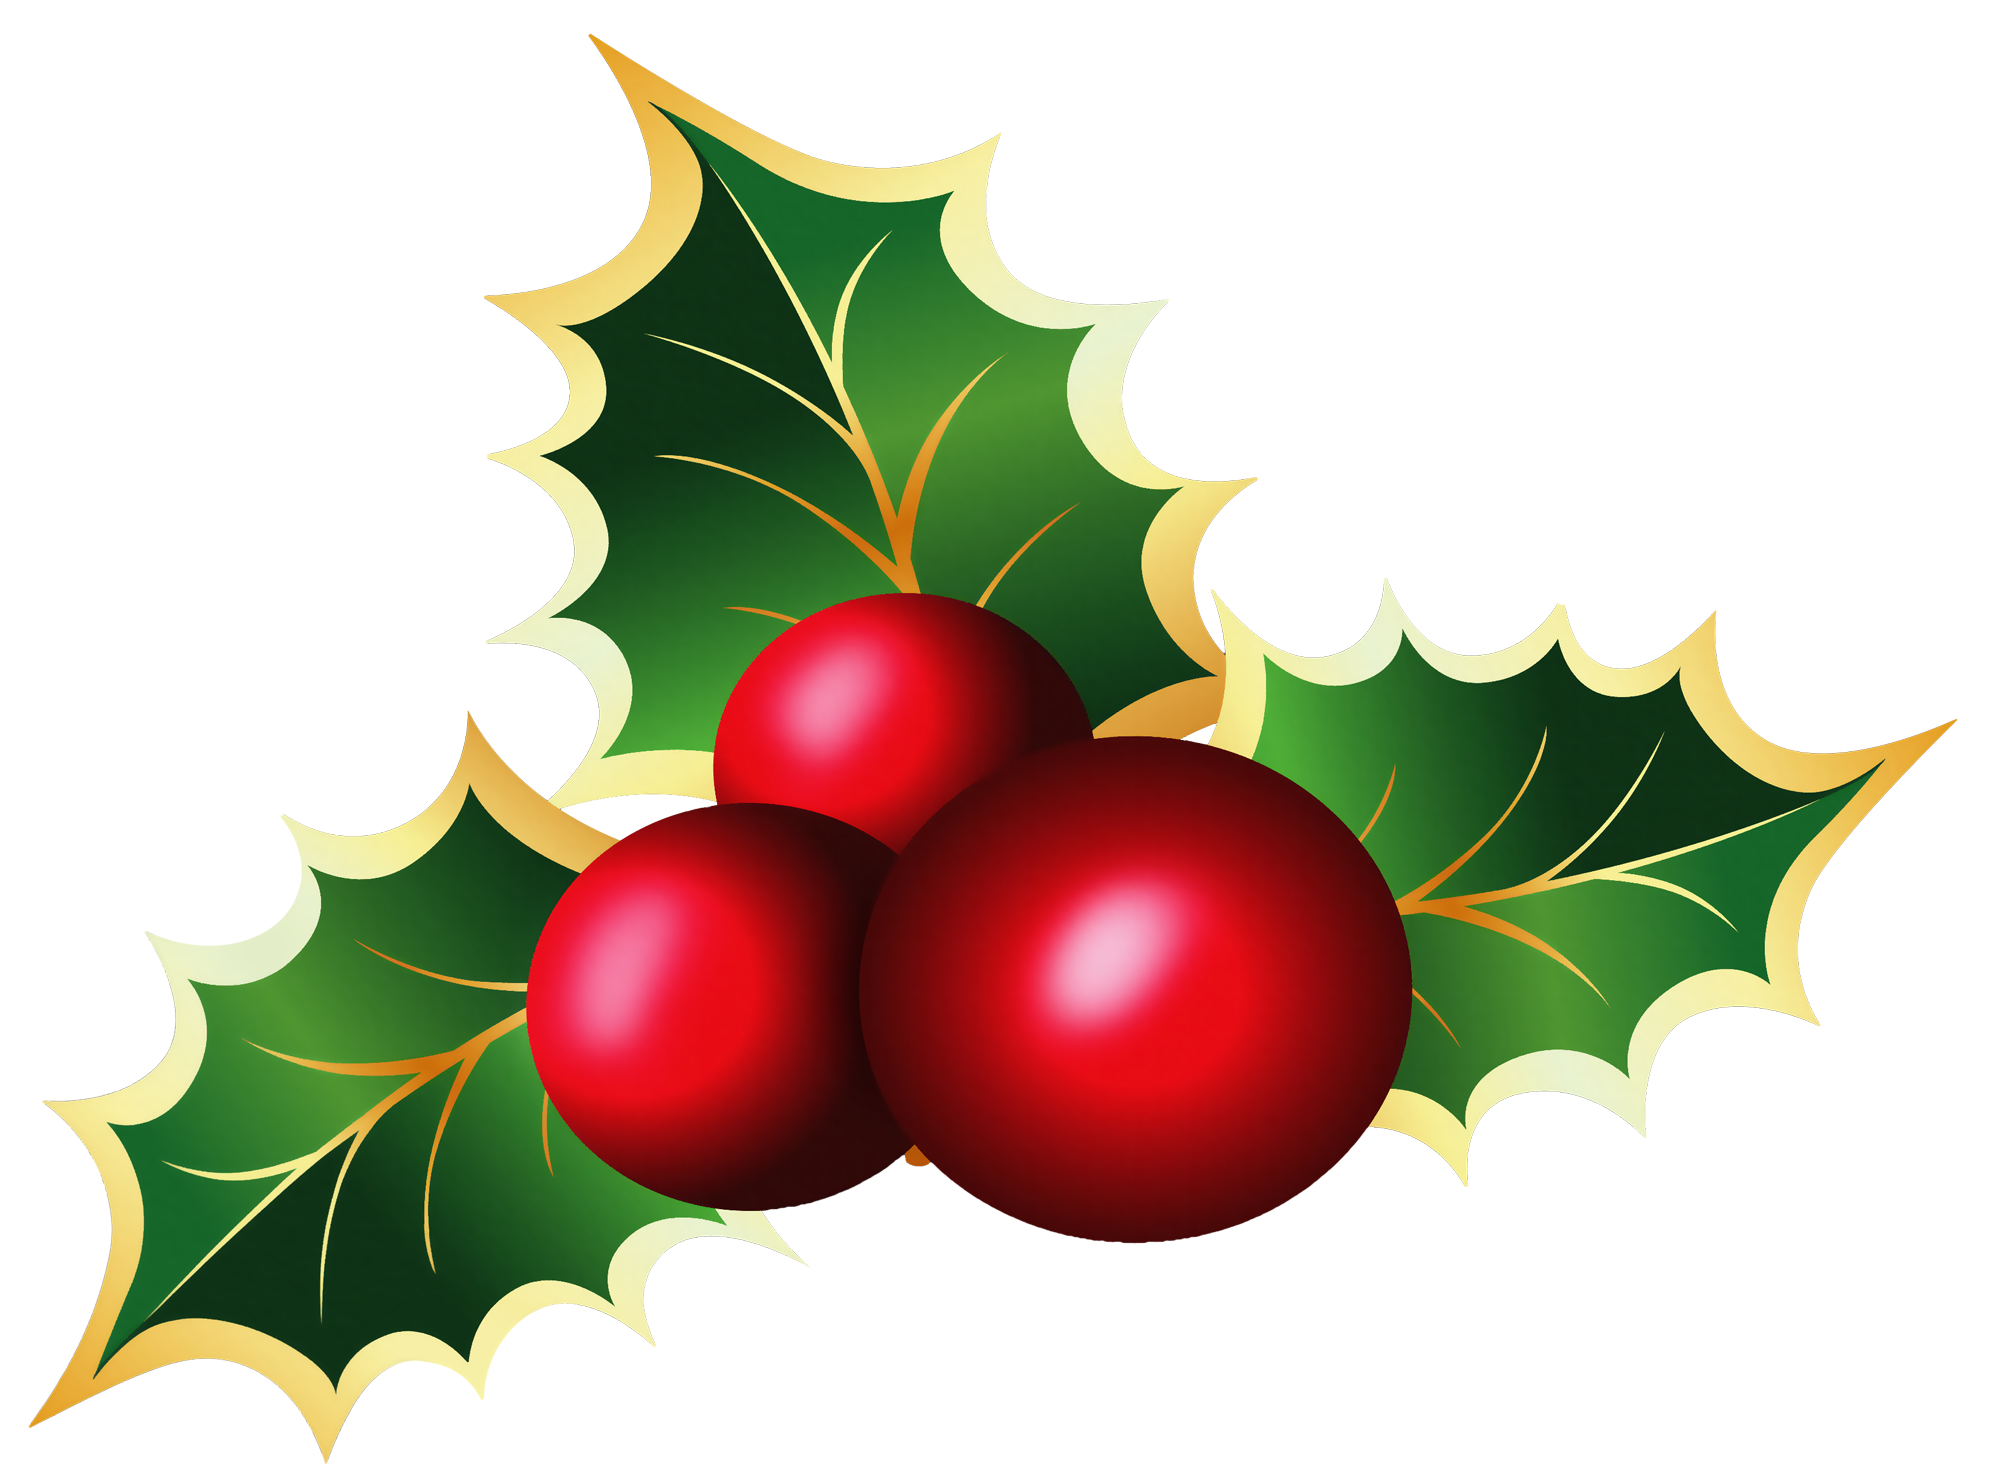 holly png